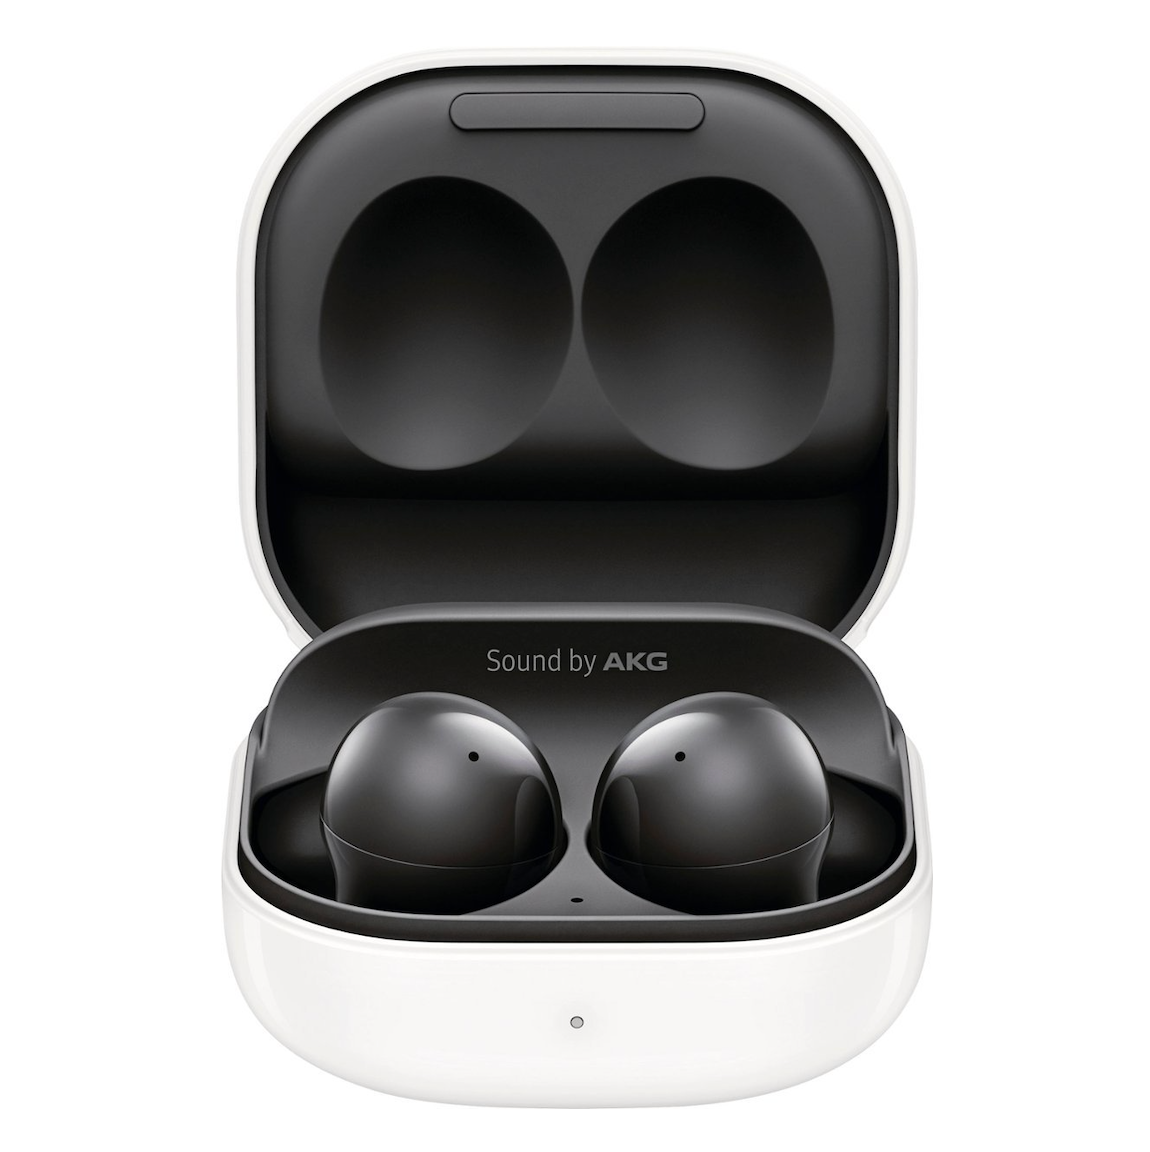 Samsung Galaxy Buds FE drop to Black Friday price at 30% off - Dexerto